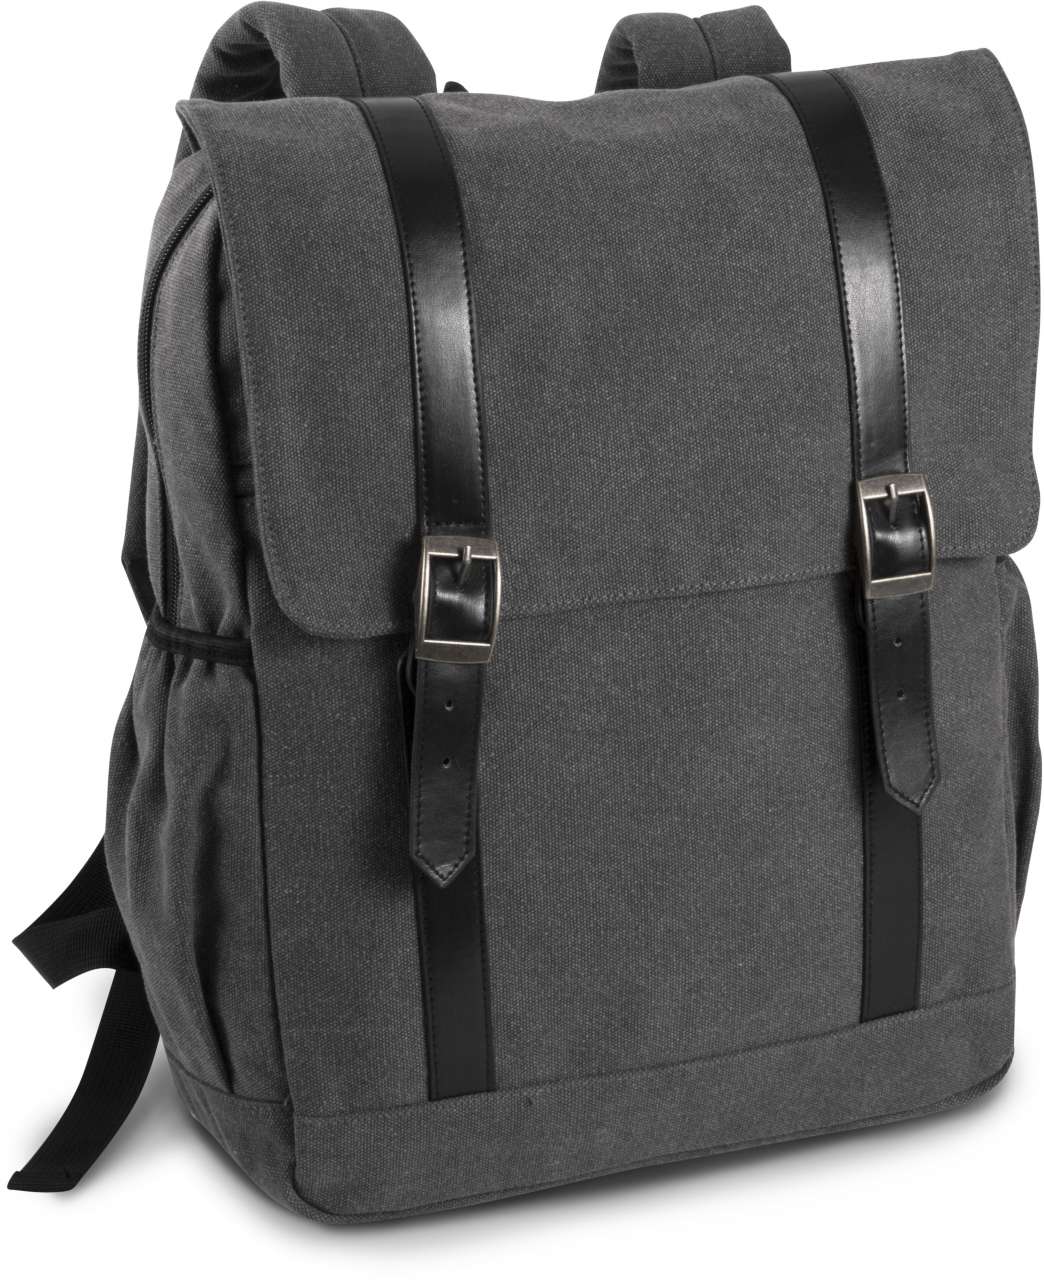 Promo  FLAP-TOP CANVAS BACKPACK